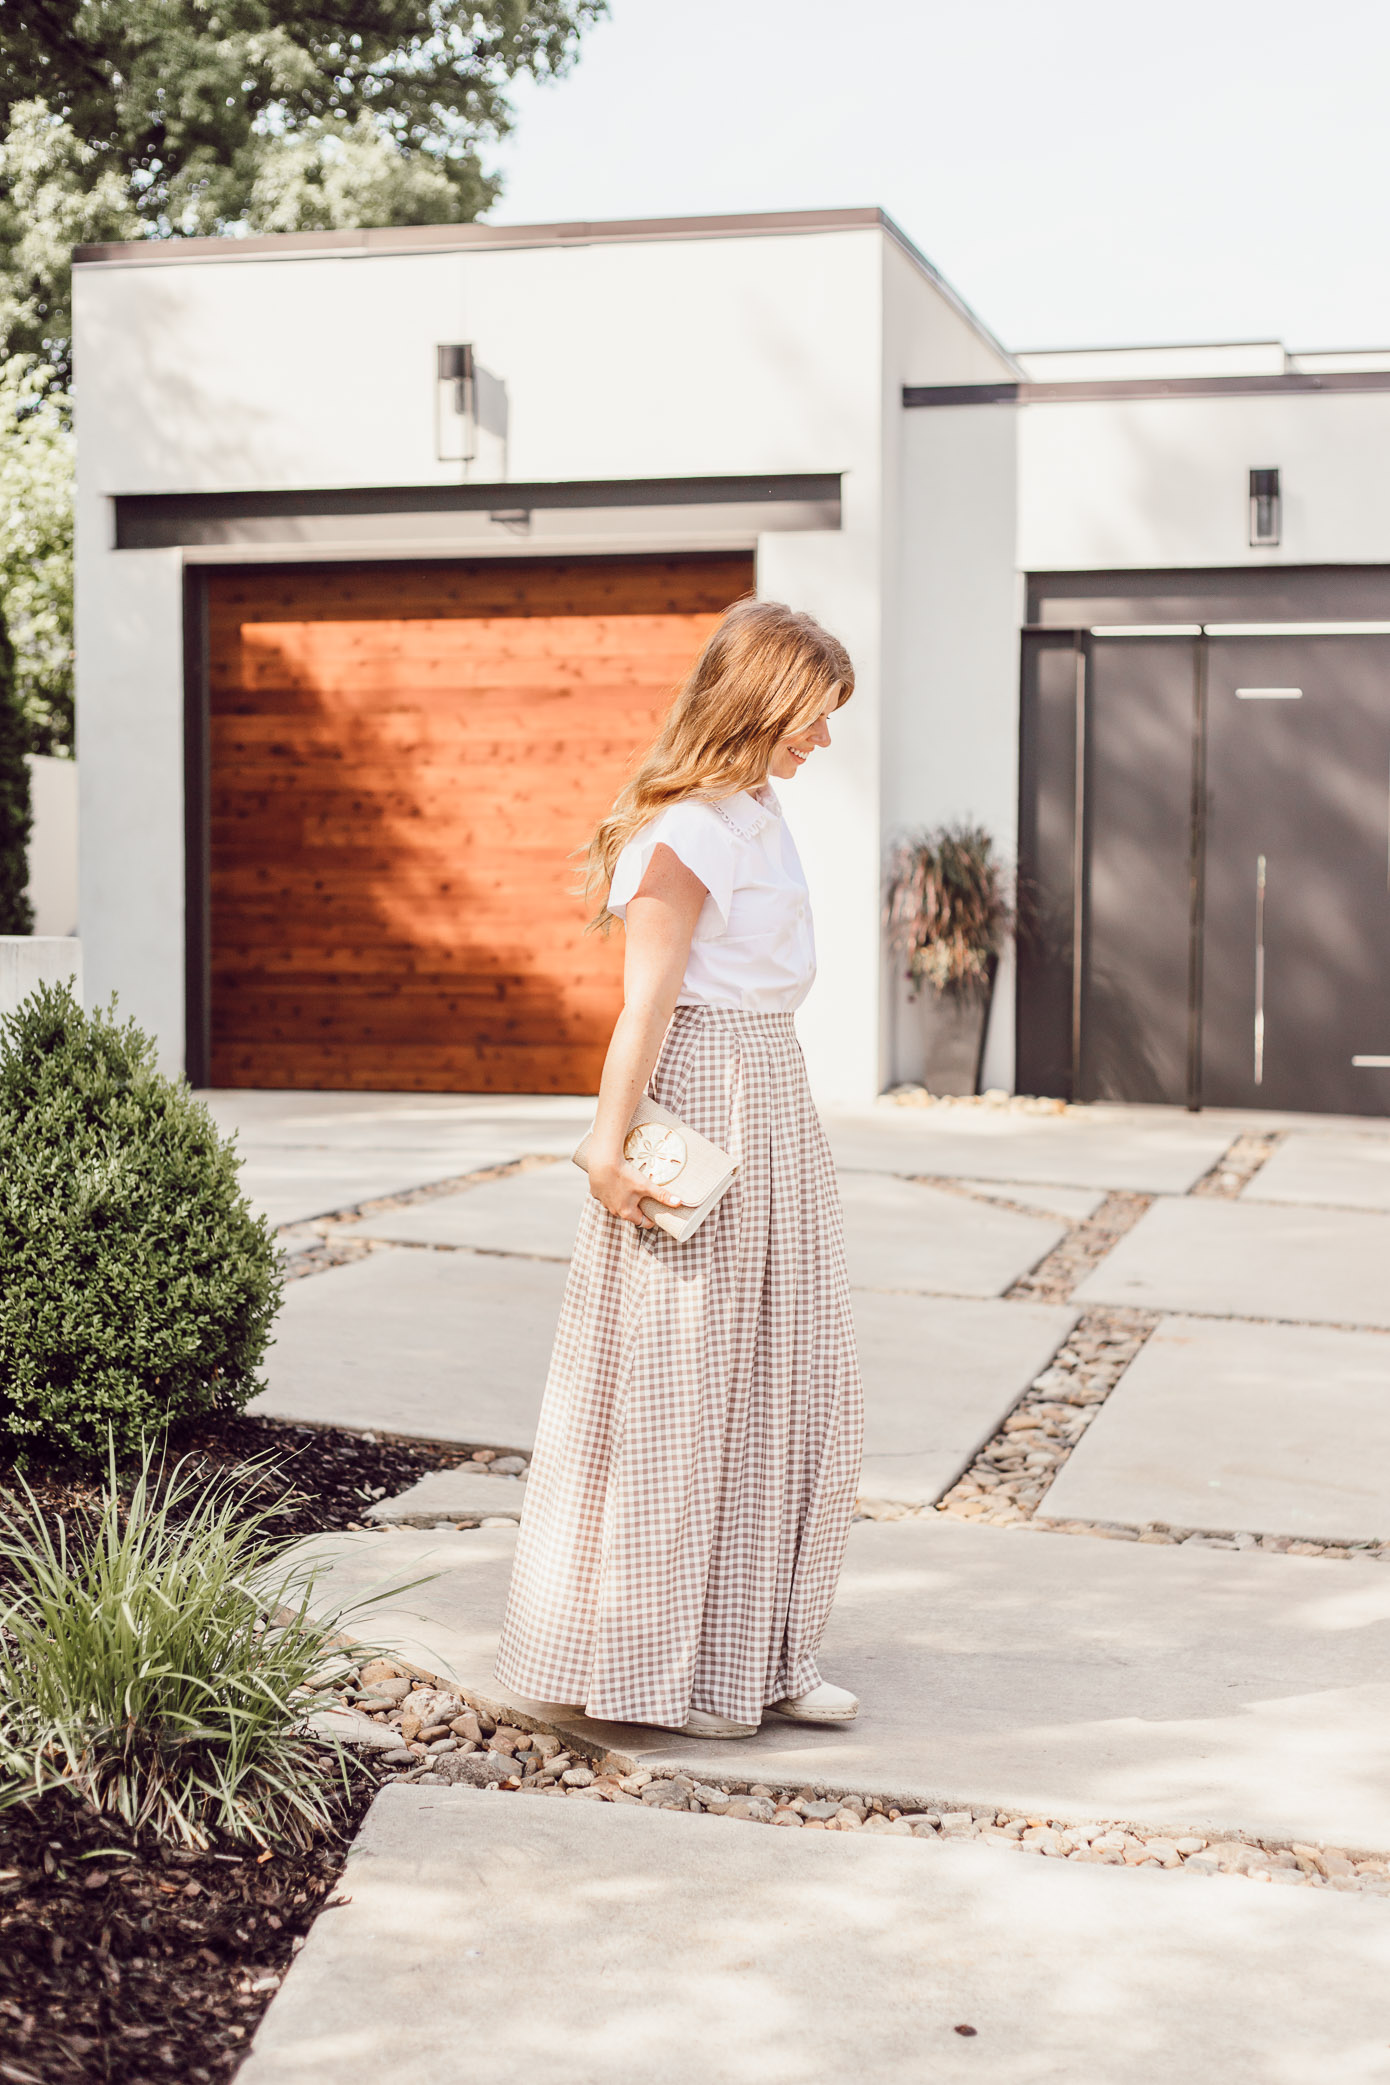 How to Style a Gingham Maxi Skirt this Summer - A Summer Gingham Maxi Skirt styled by Laura Leigh of Louella Reese #maxiskirt #gingham #southernstyle